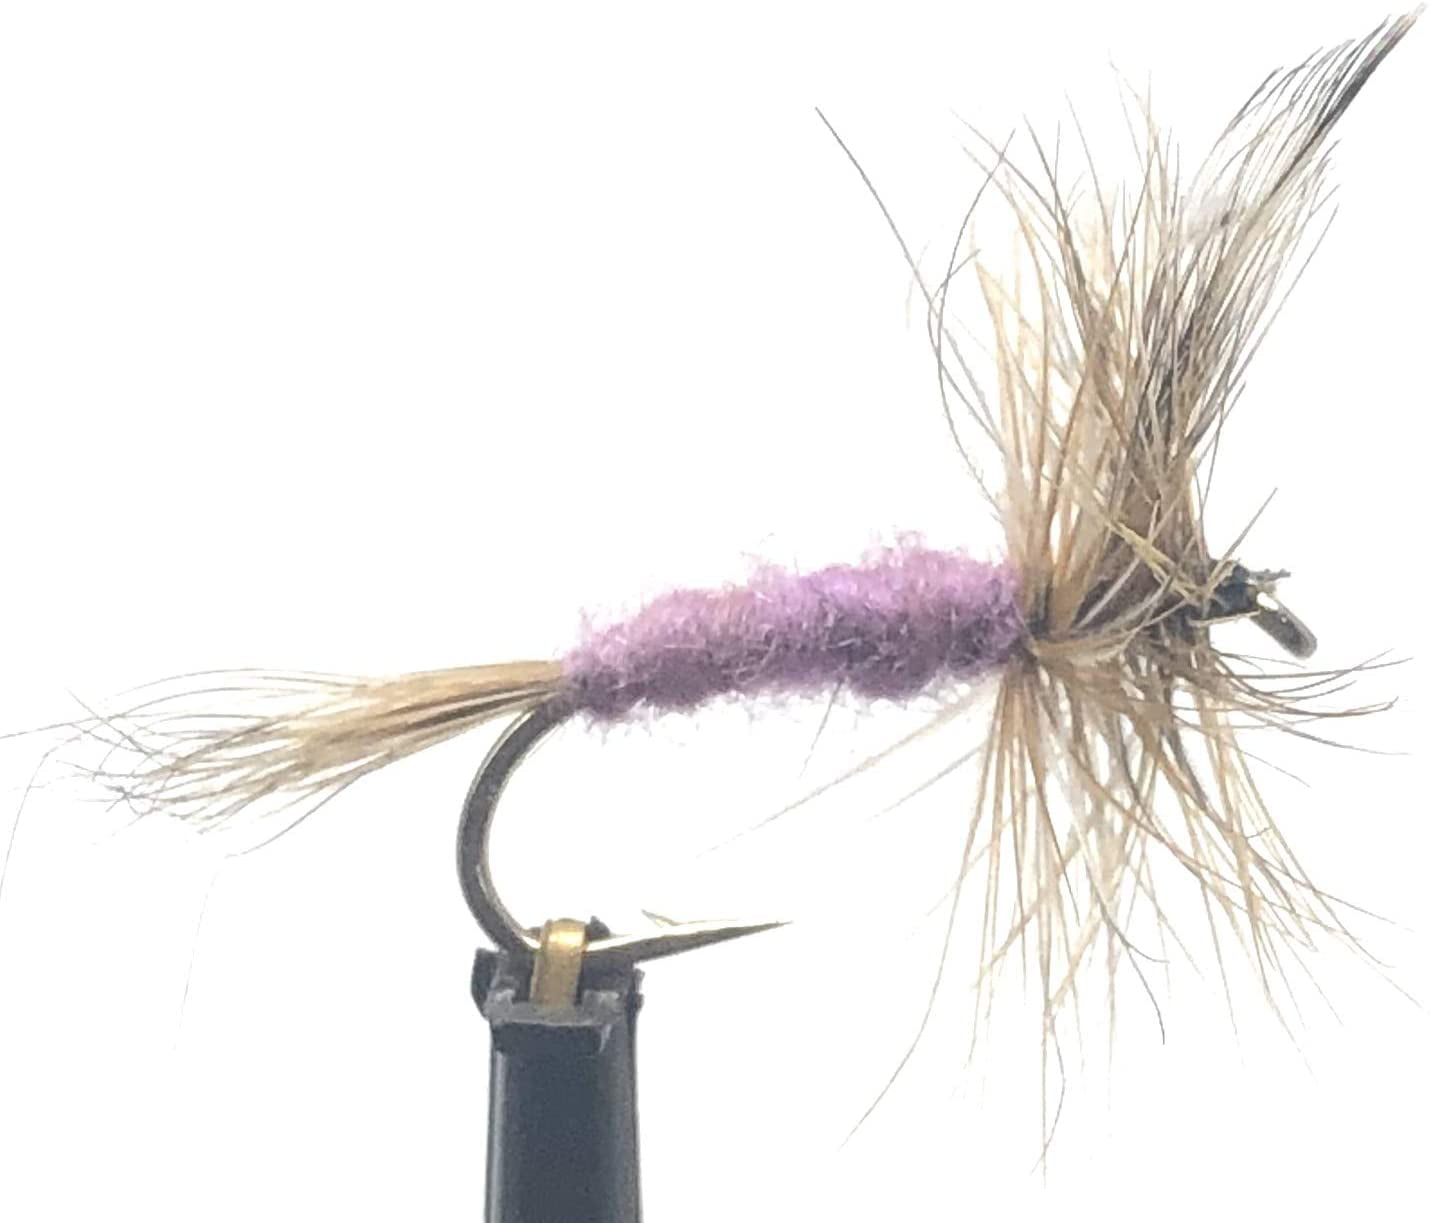 12 ADAMS  Fishing  Flies Available in # 12,16